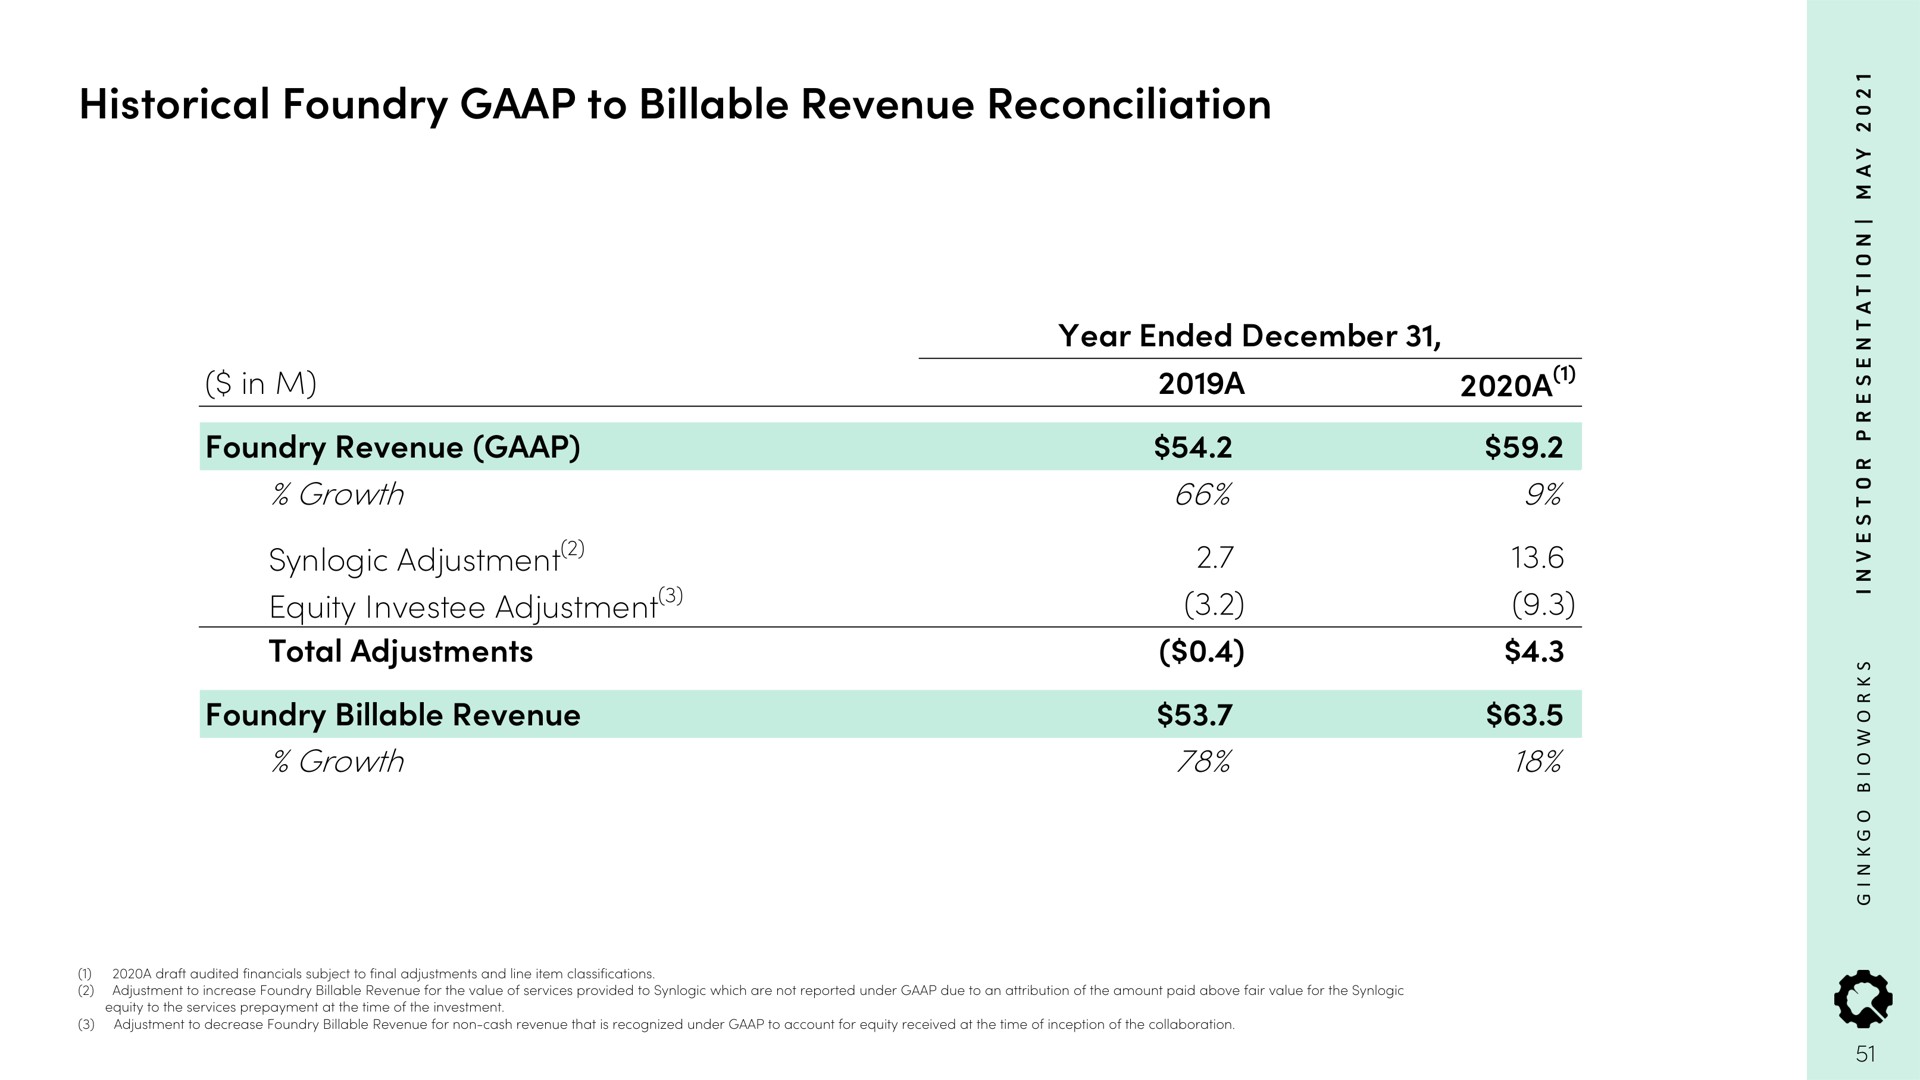 historical foundry to billable revenue reconciliation | Ginkgo